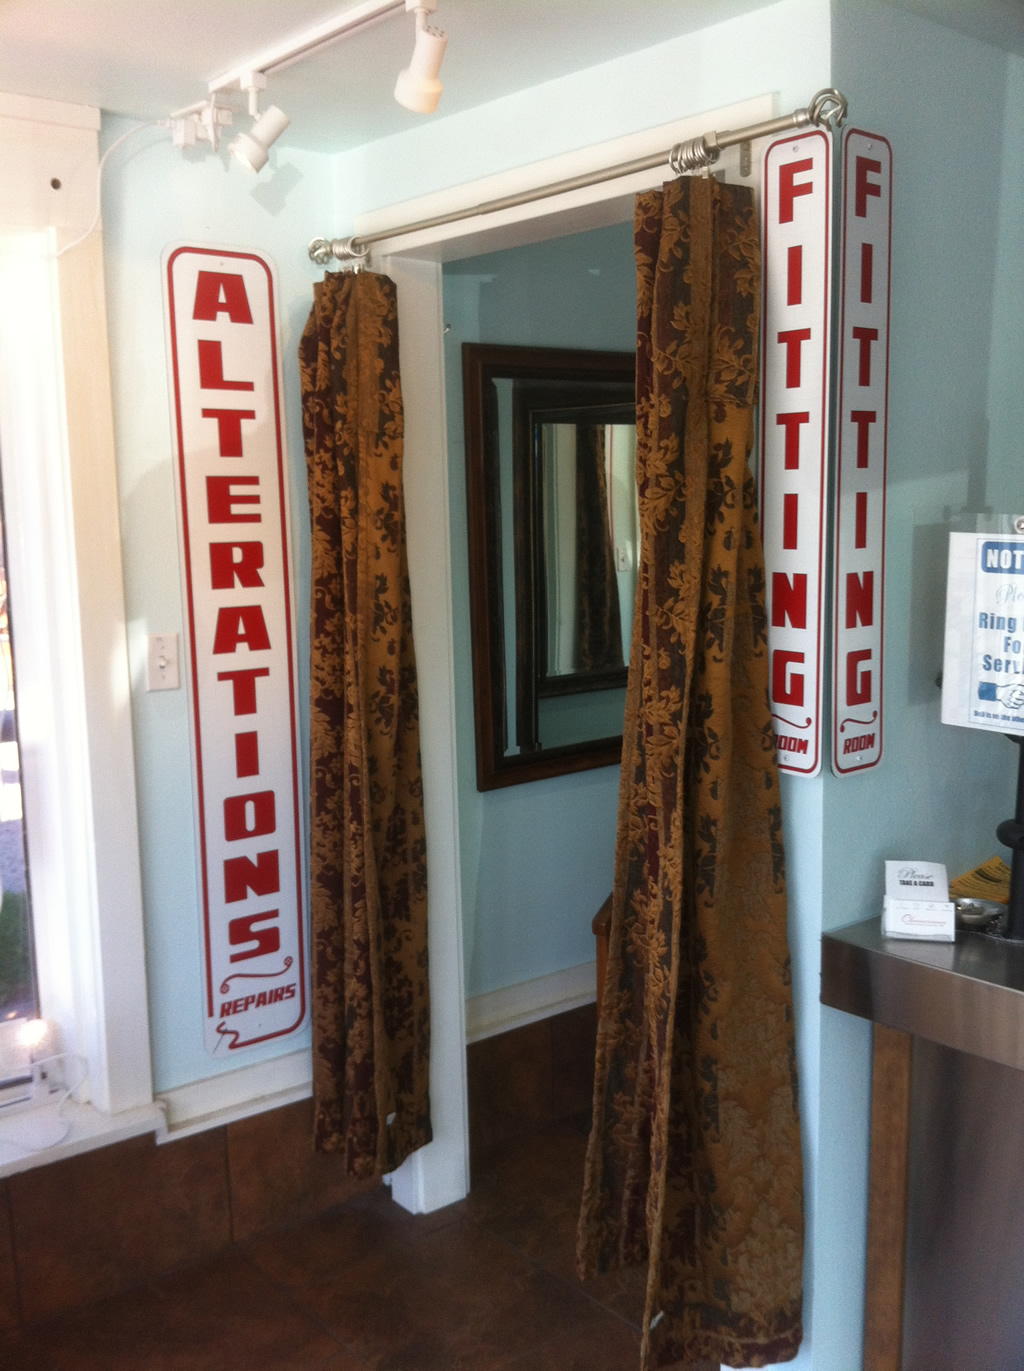 Alteration Fitting Room - Main Plaint New Orleans